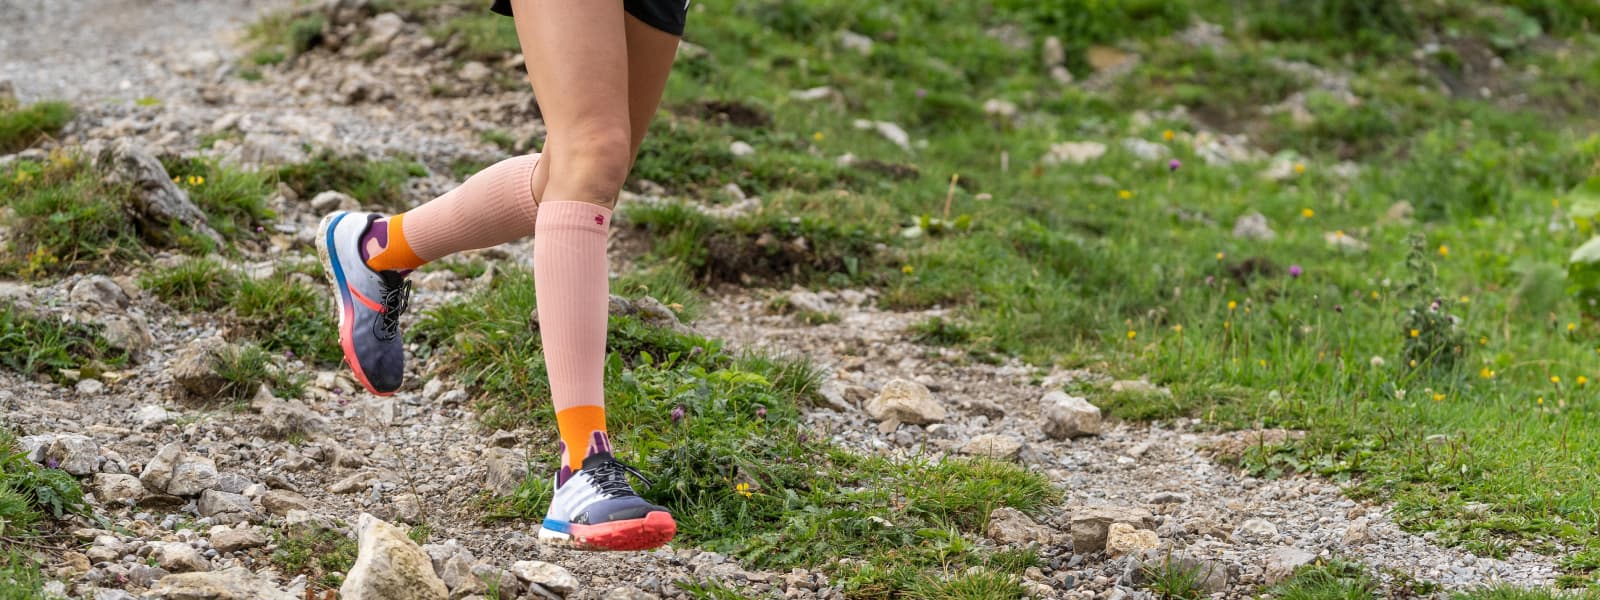 The runner runs down a mountain and wears the Trail Run Socks in the color Peach